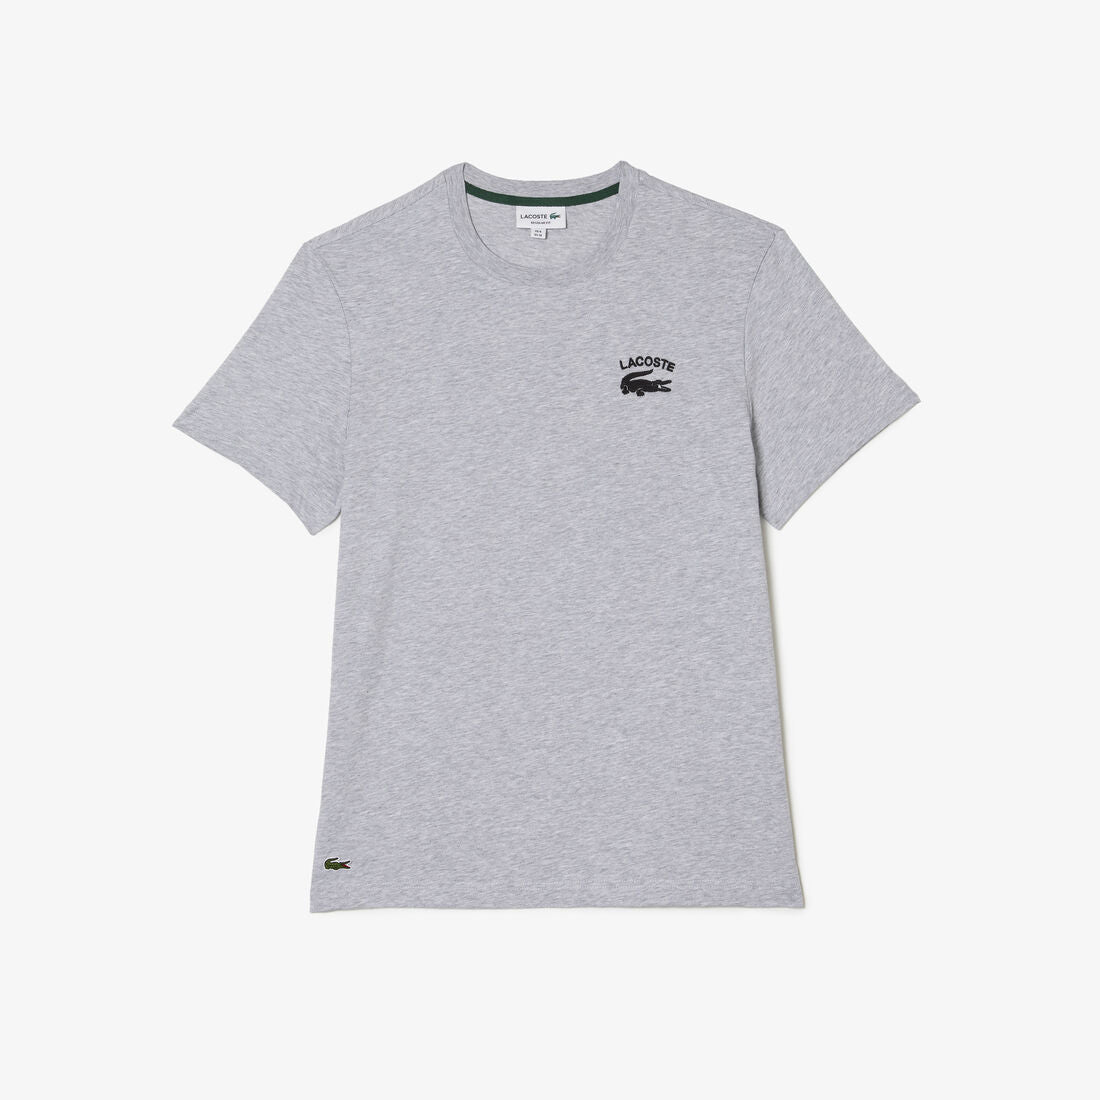 LCA-W15 (Lacoste soft branding t-shirt silver chine) 32294783 LACOSTE